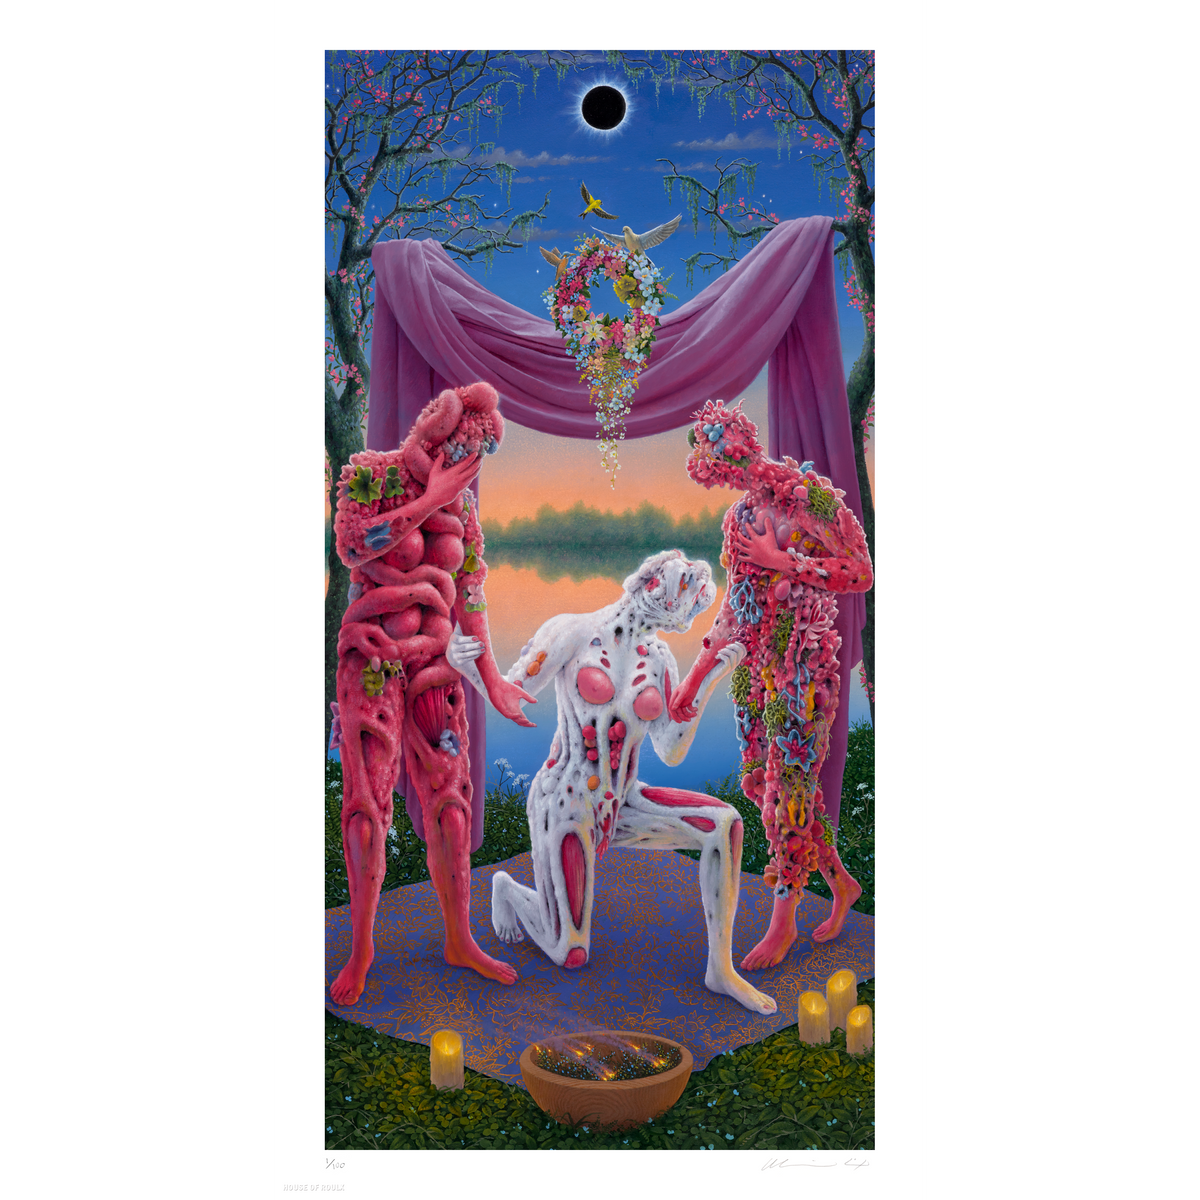 Adrian Cox &quot;Healer Veiled&quot; - Archival Print, Limited Edition of 100 - 13 x 24&quot;